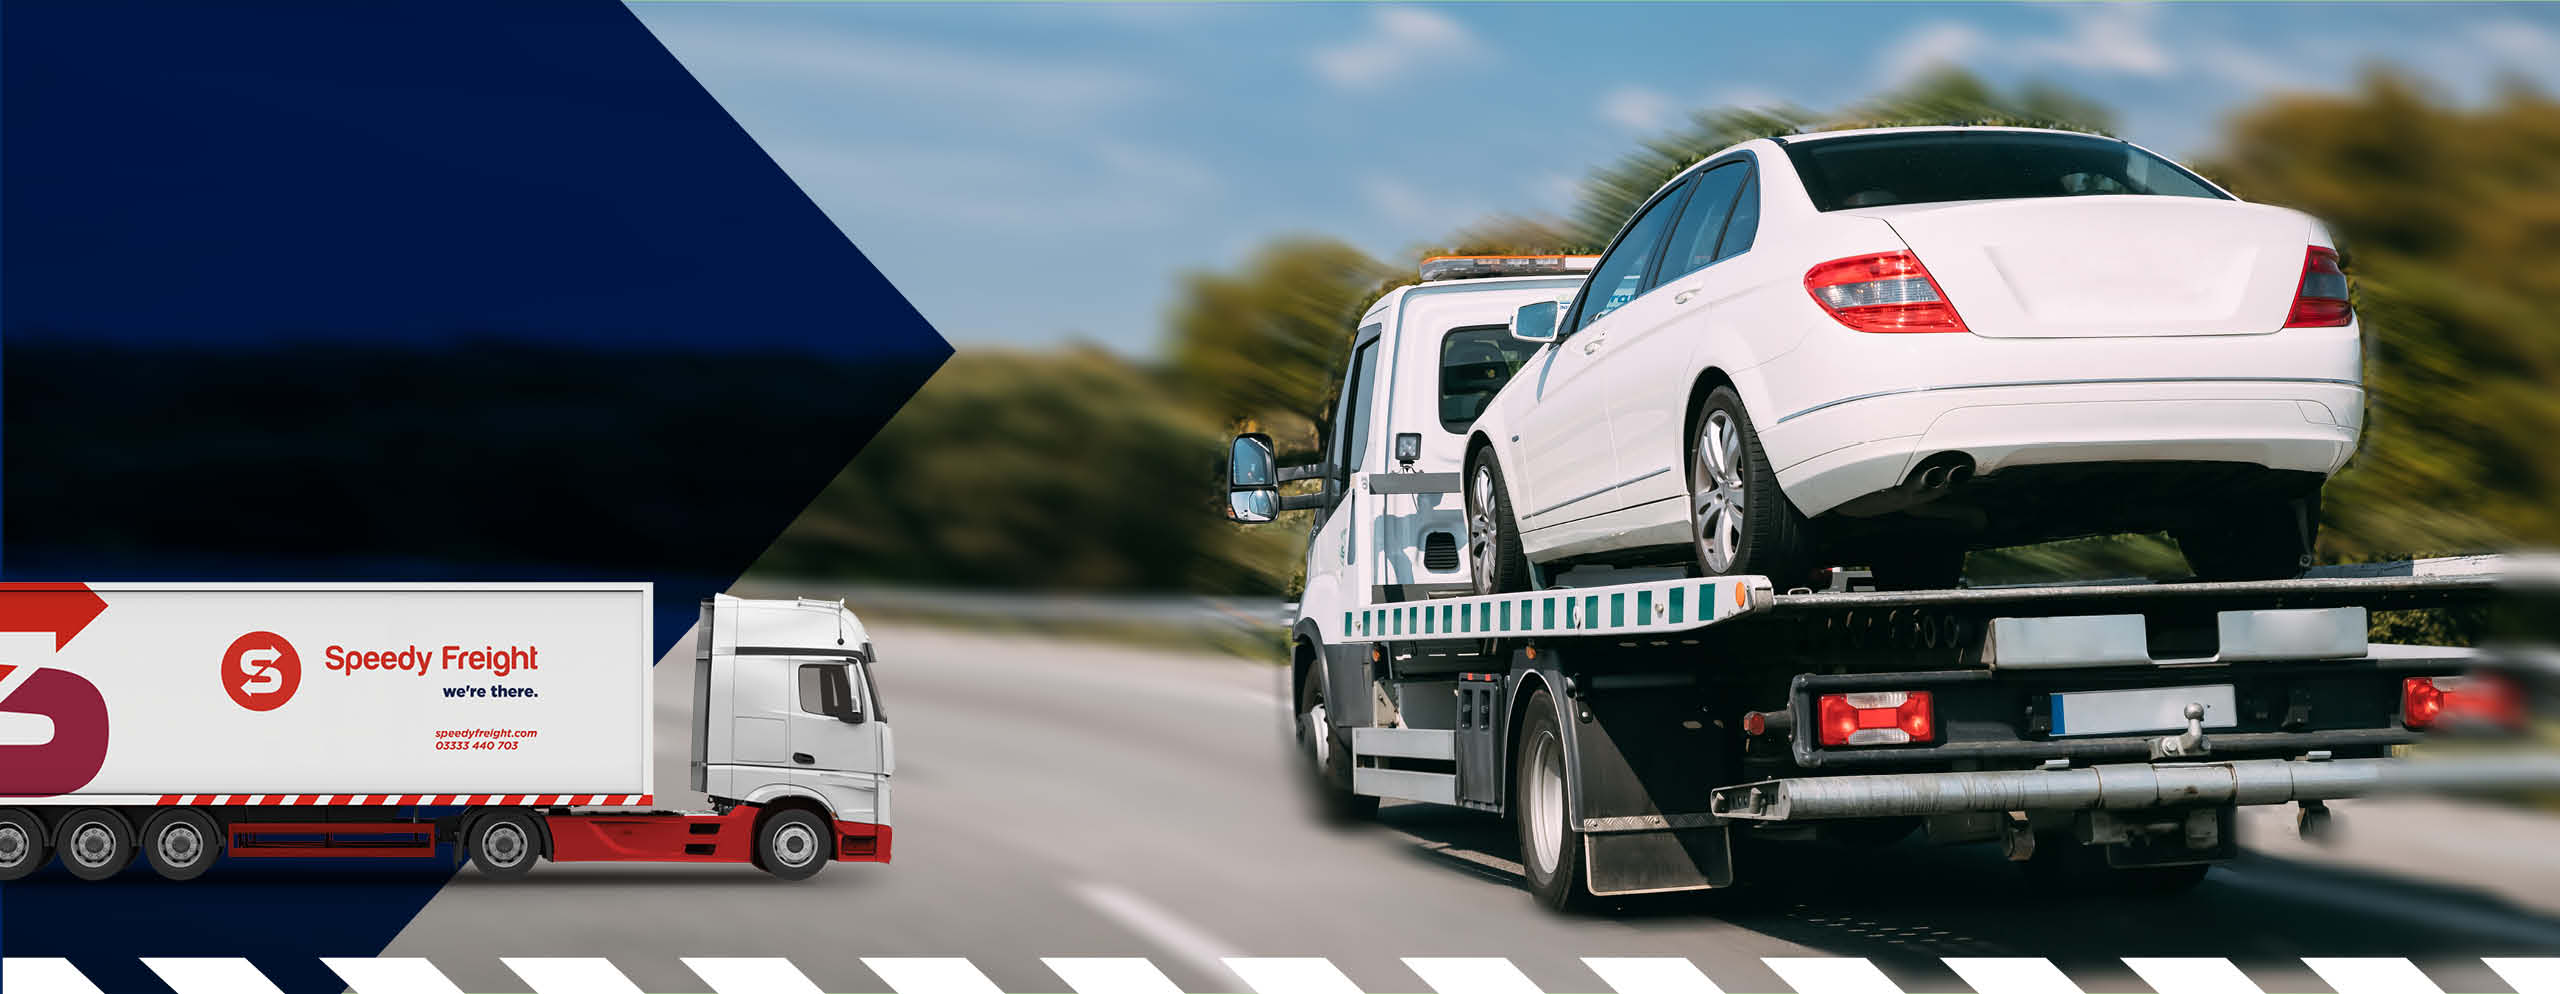 Vehicle Transportation & Delivery Services